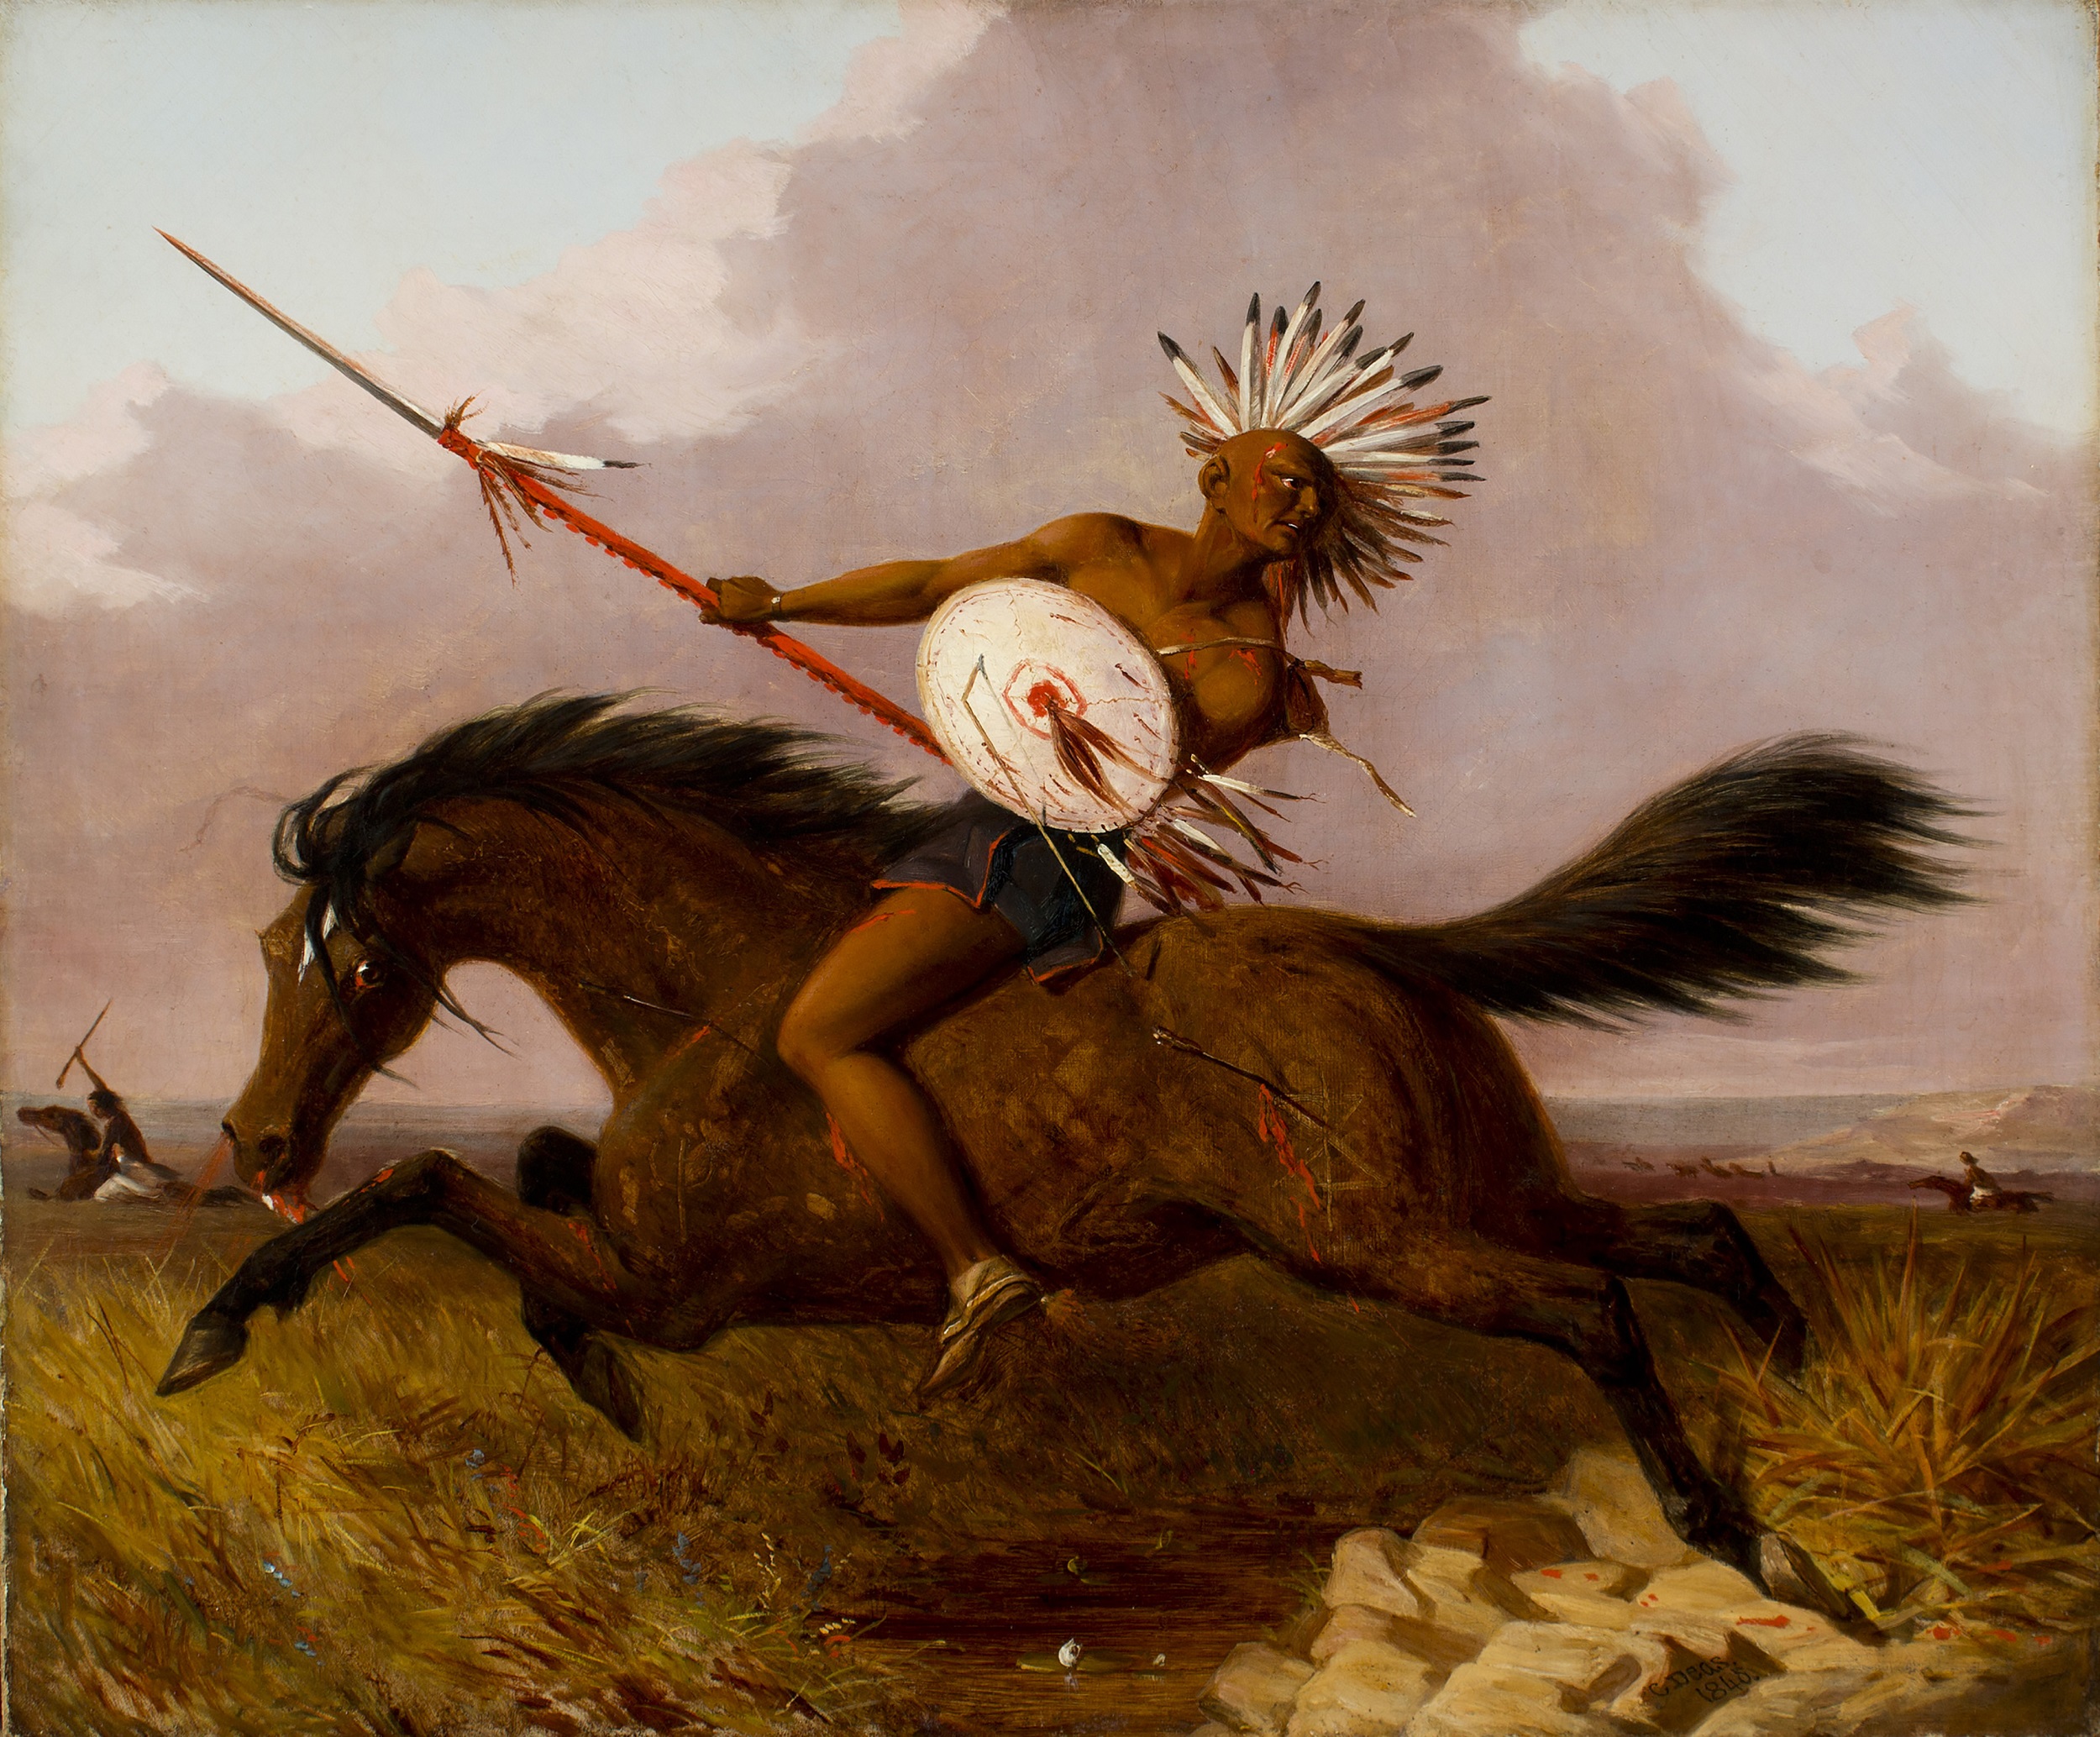 Oil painting of a wounded Native American man riding a horse across a prairie